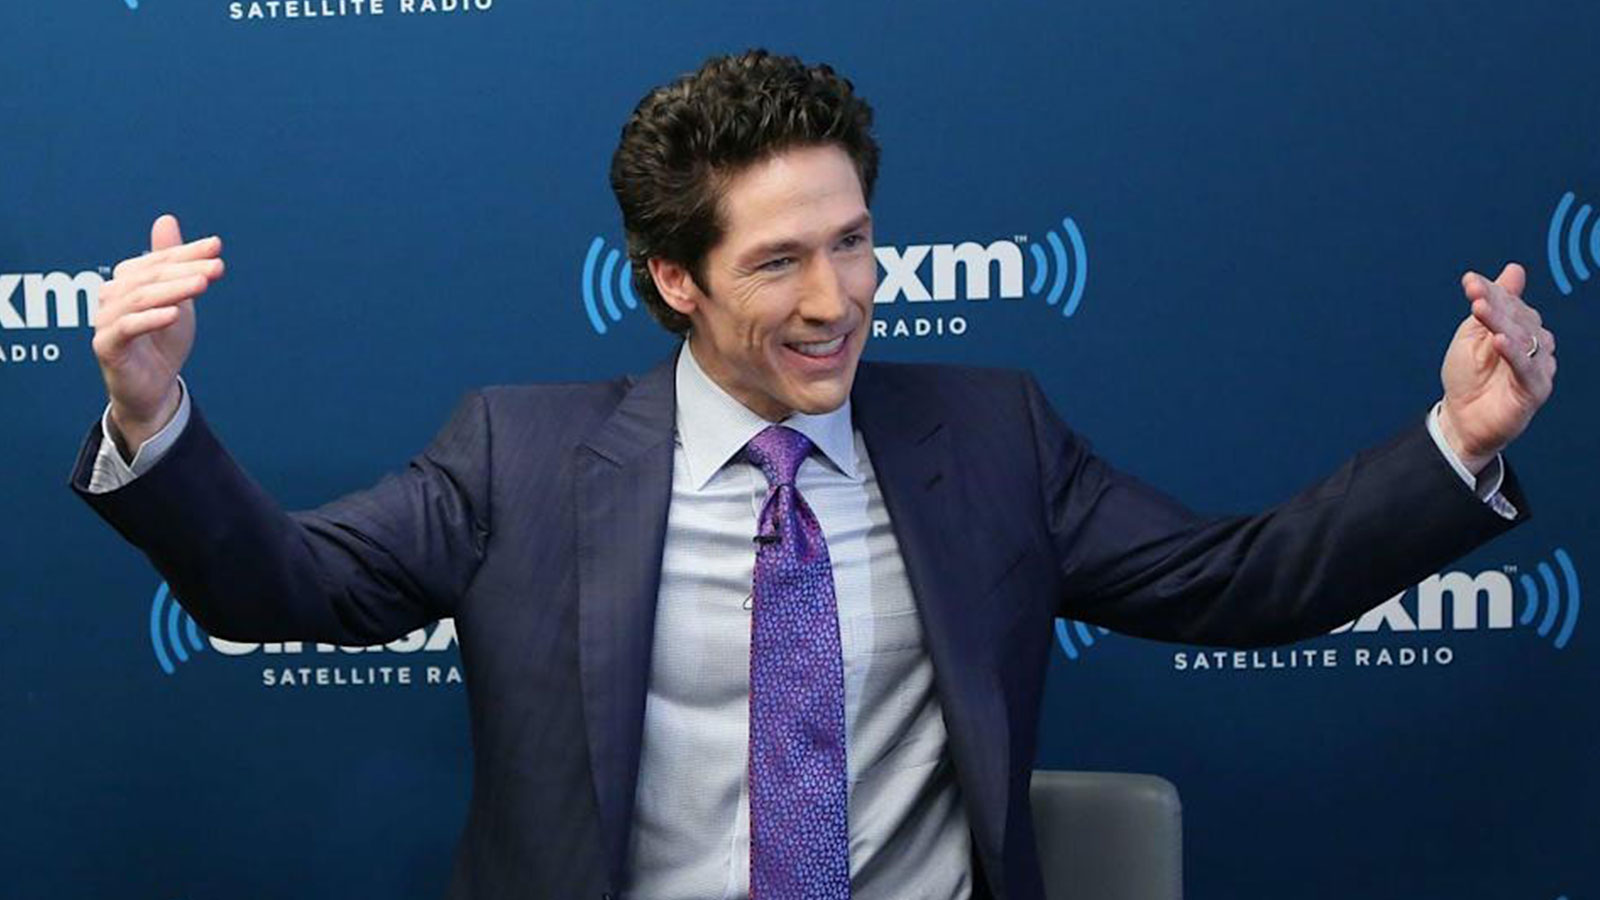 Reports on Joel Osteen’s wealth led to the trending of #TaxTheChurches.